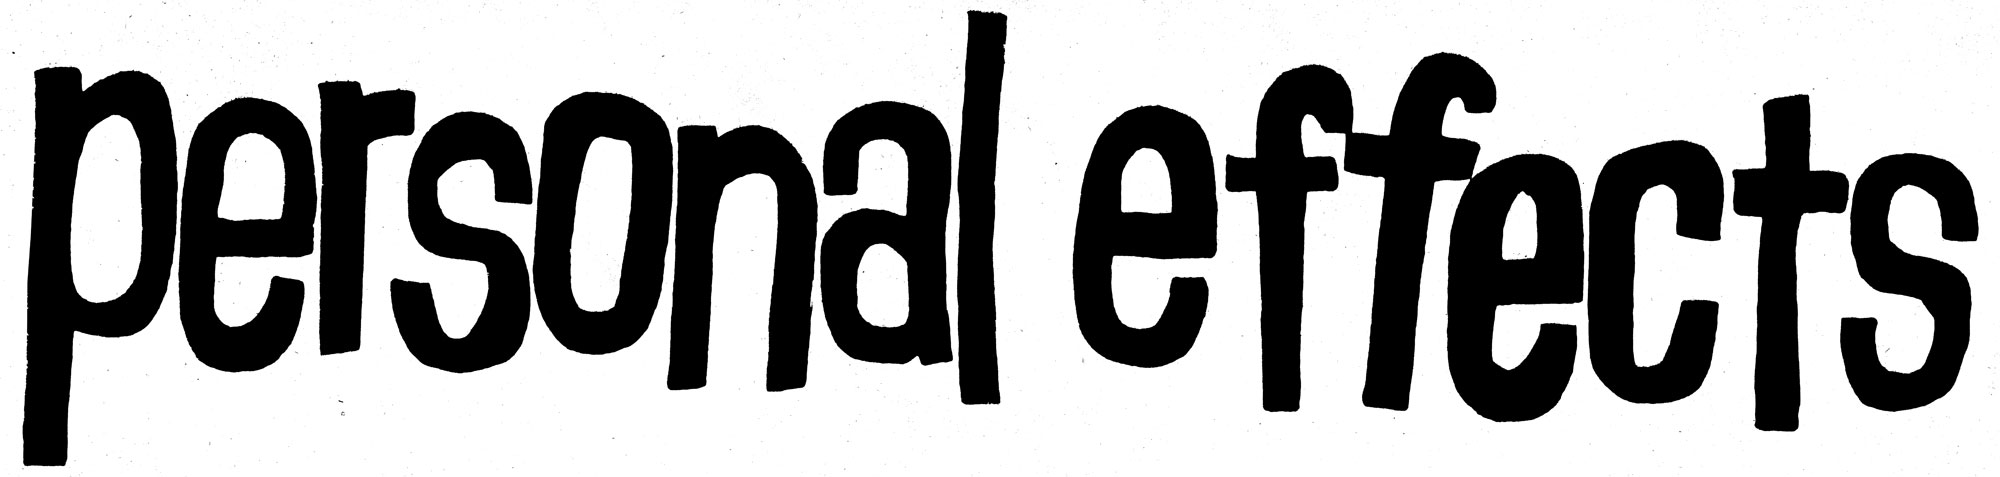 Personal Effects band logo